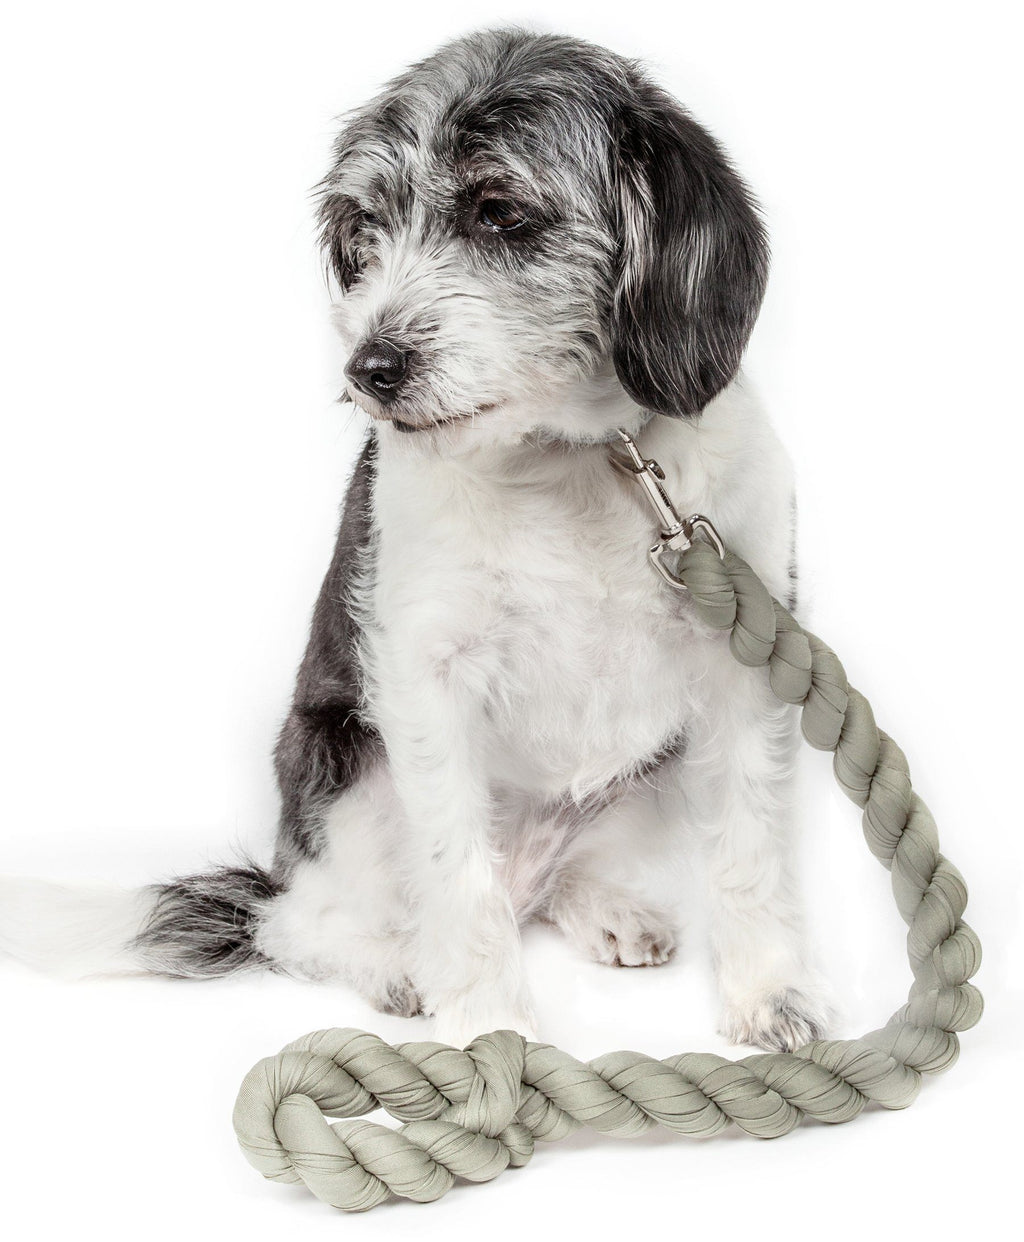 Pet Life ® 'Tough-Tugger' Industrial-Strength Shock Absorption Woven Pet Dog Leash Olive 